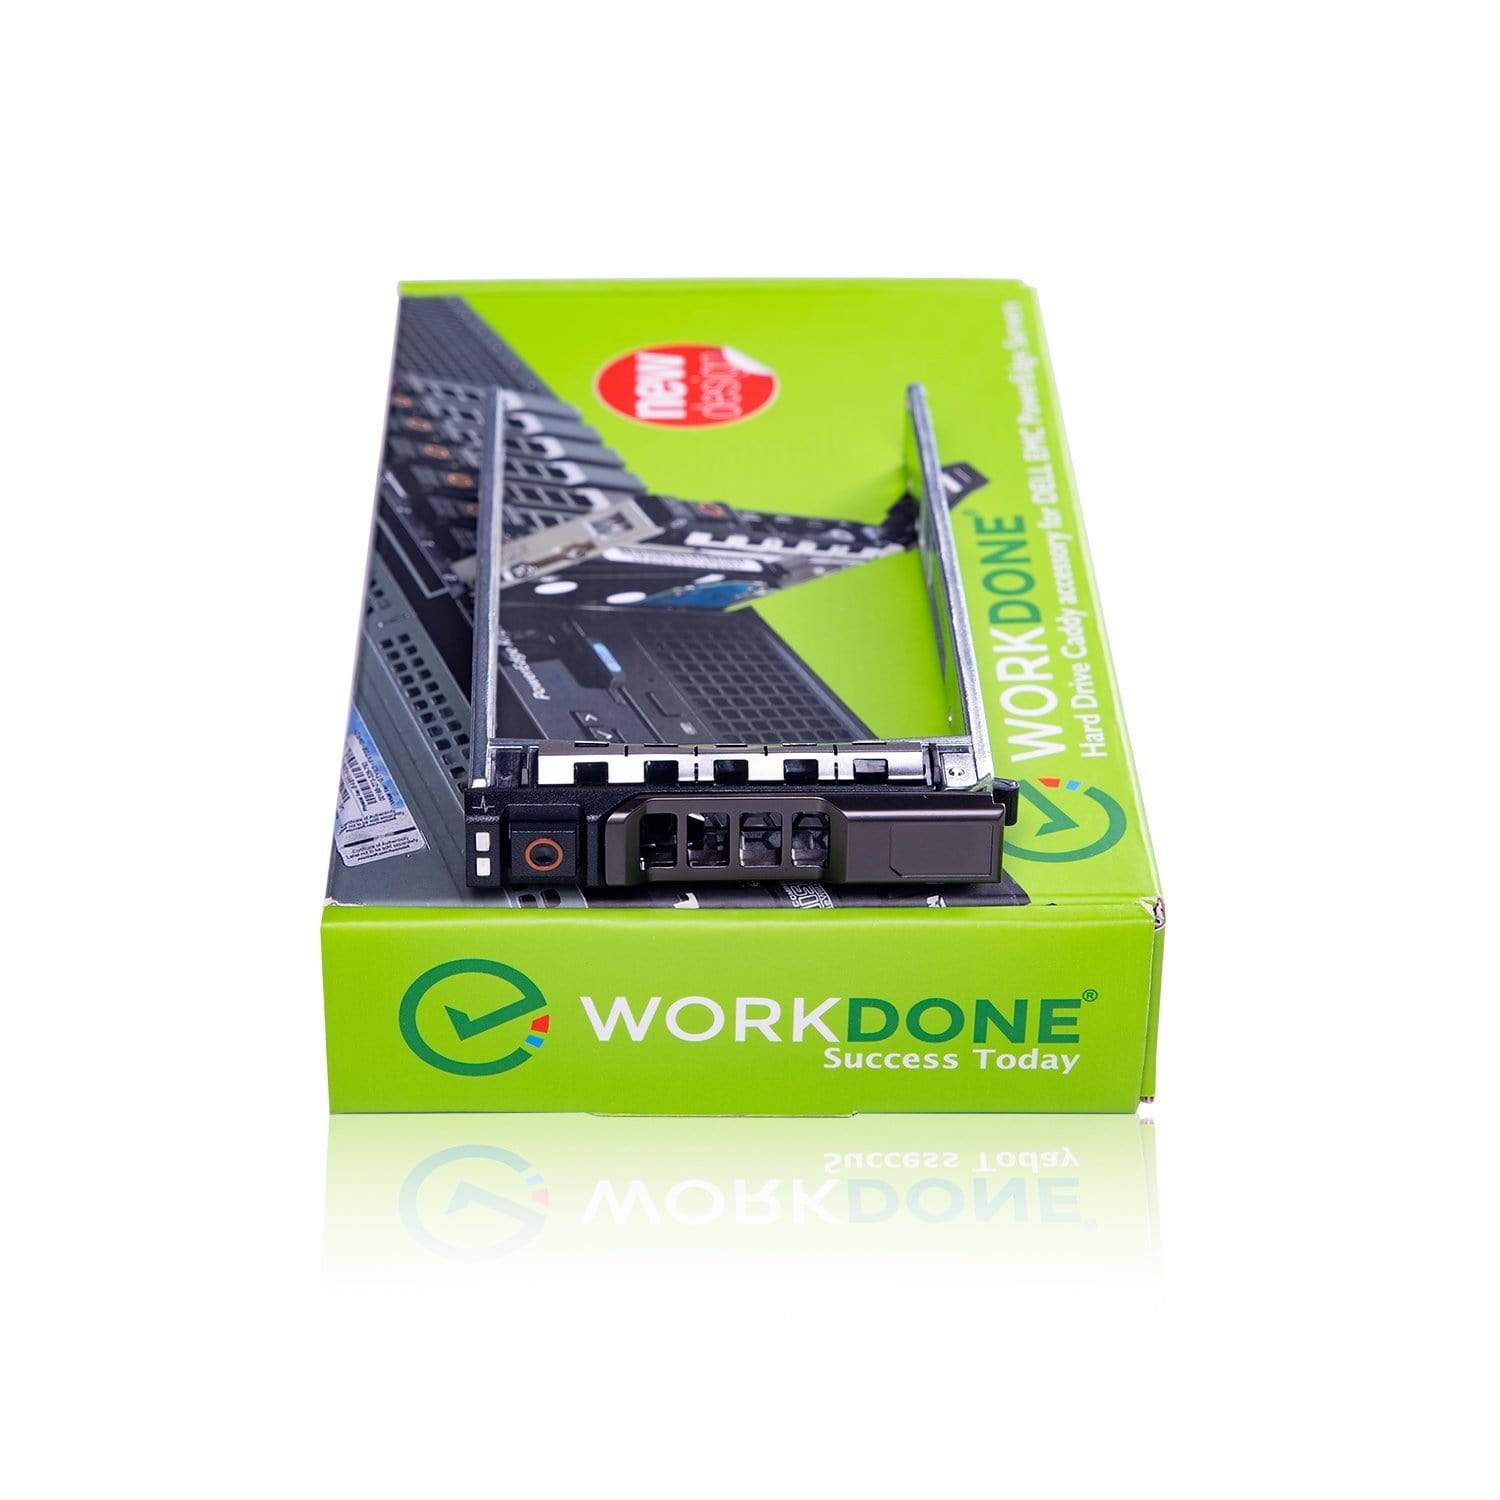 WORKDONE 2-Pack - 2.5-inch Server Caddy for Dell Servers